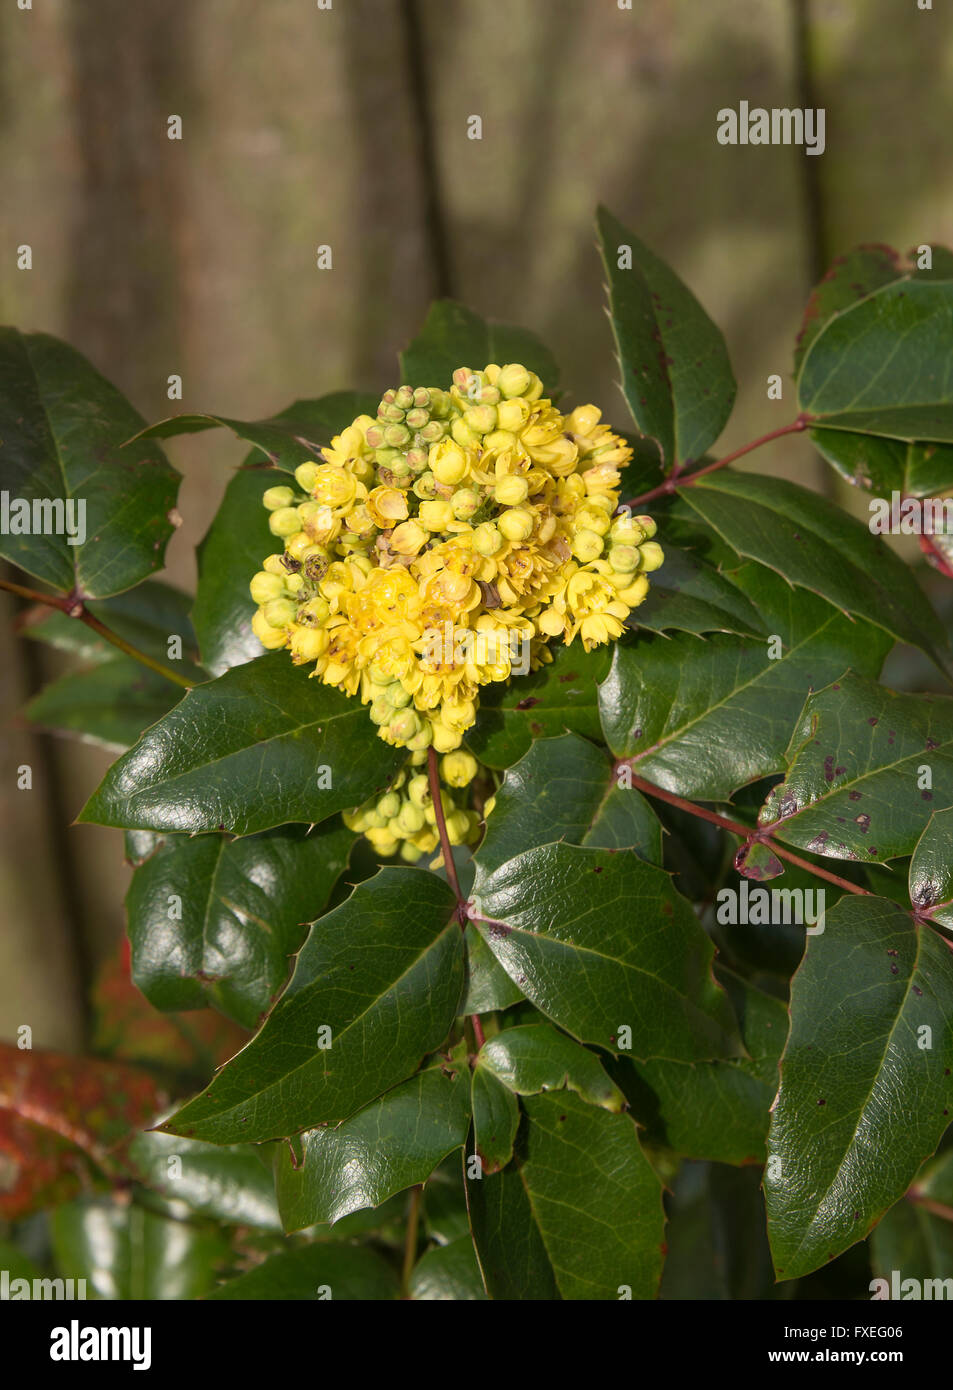 Small Tightly Packed Bunch of Yellow Flowers in a Mahonia Aquifolium Shrub with Green Wax Like Leaves in a Cheshire Garden Stock Photo